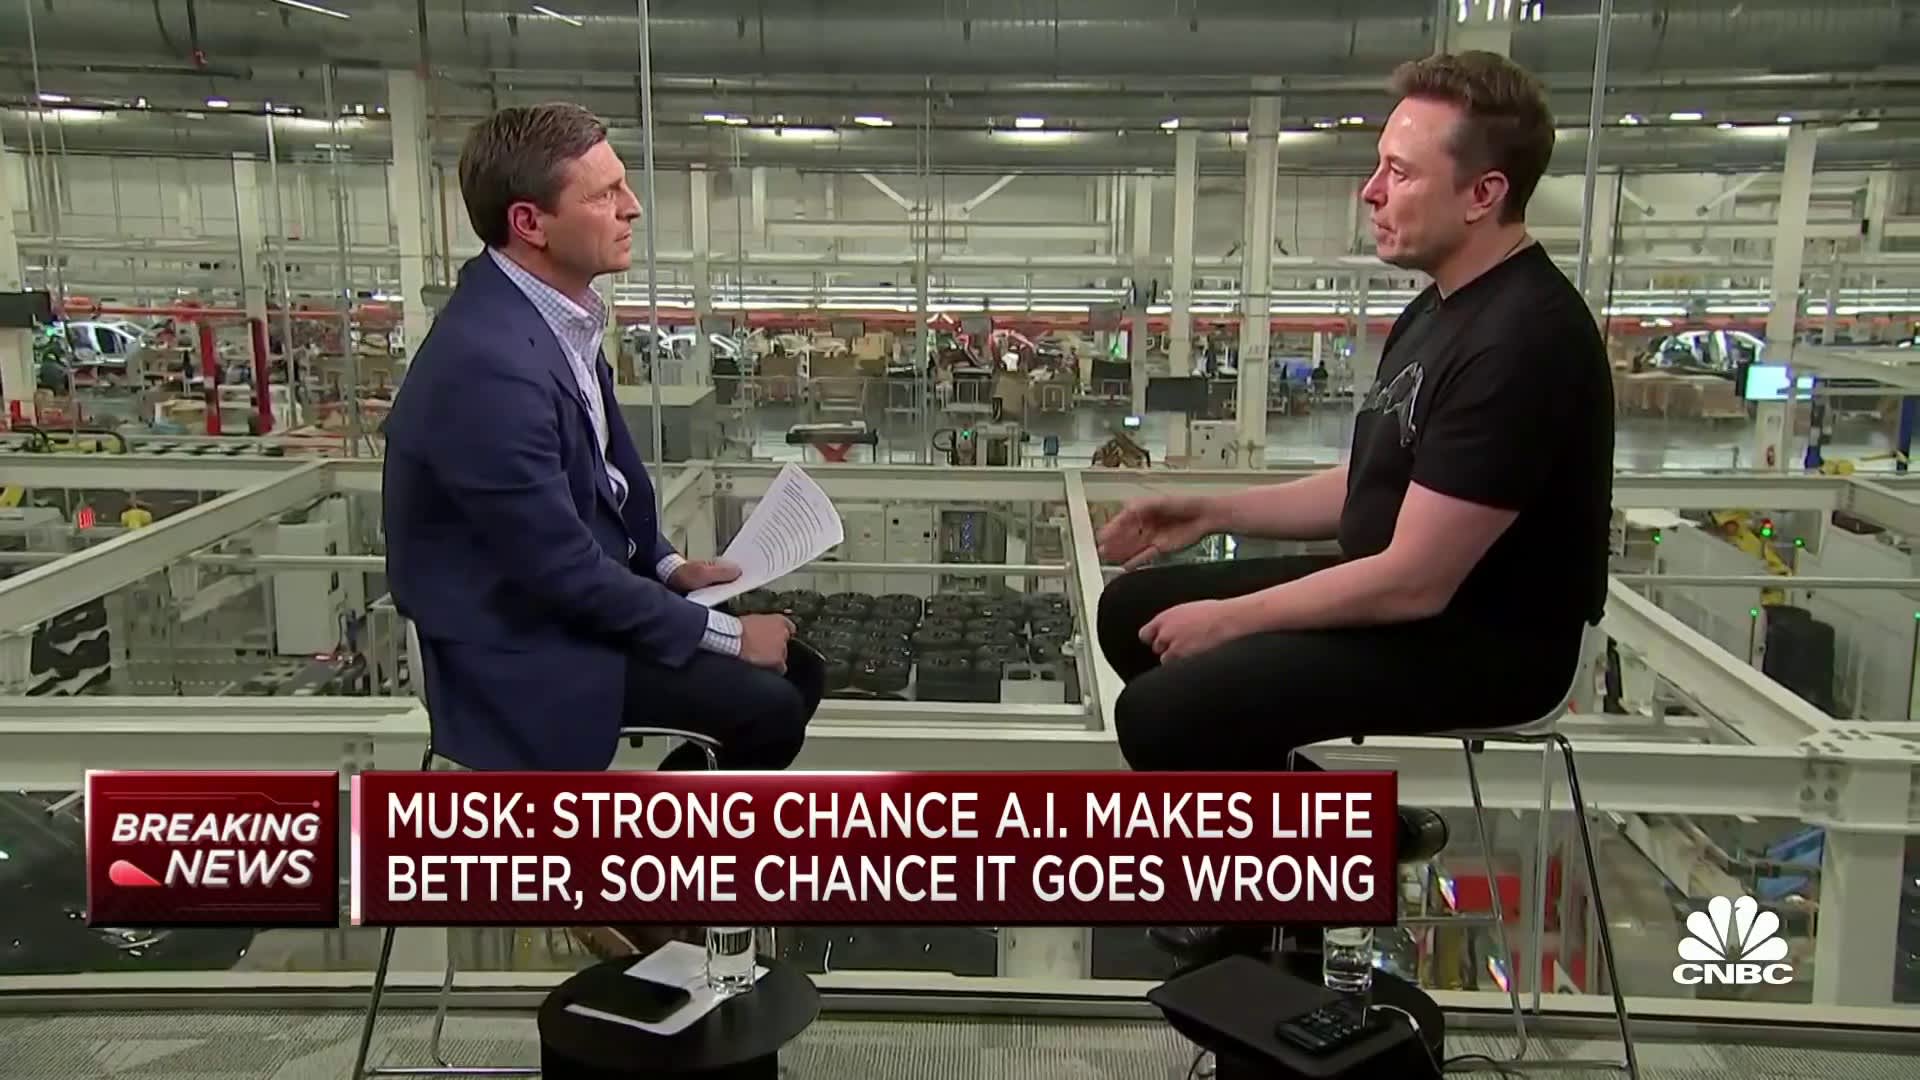 Tesla CEO Elon Musk discusses the implications of A.I. on his children's future in the workforce